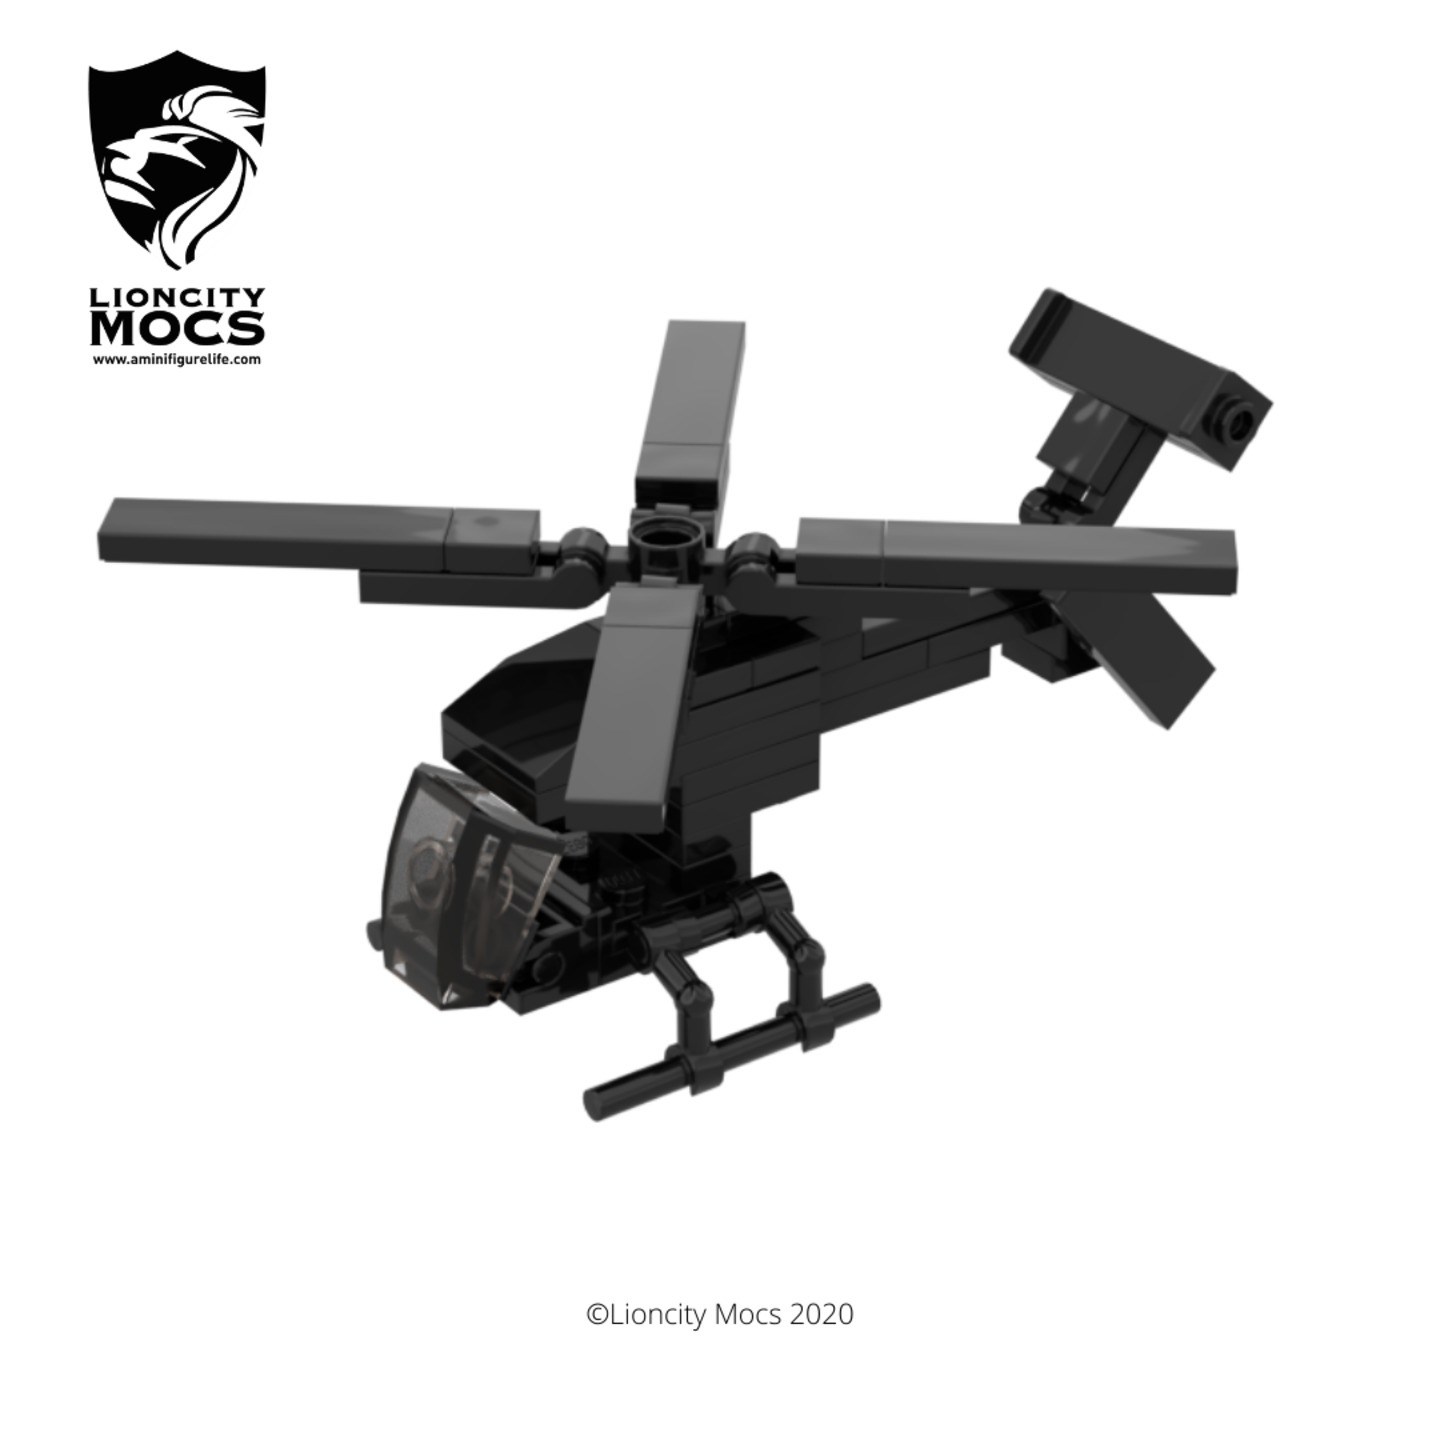 [PDF Instructions Only] MH-6 Little Bird Helicopter Mini